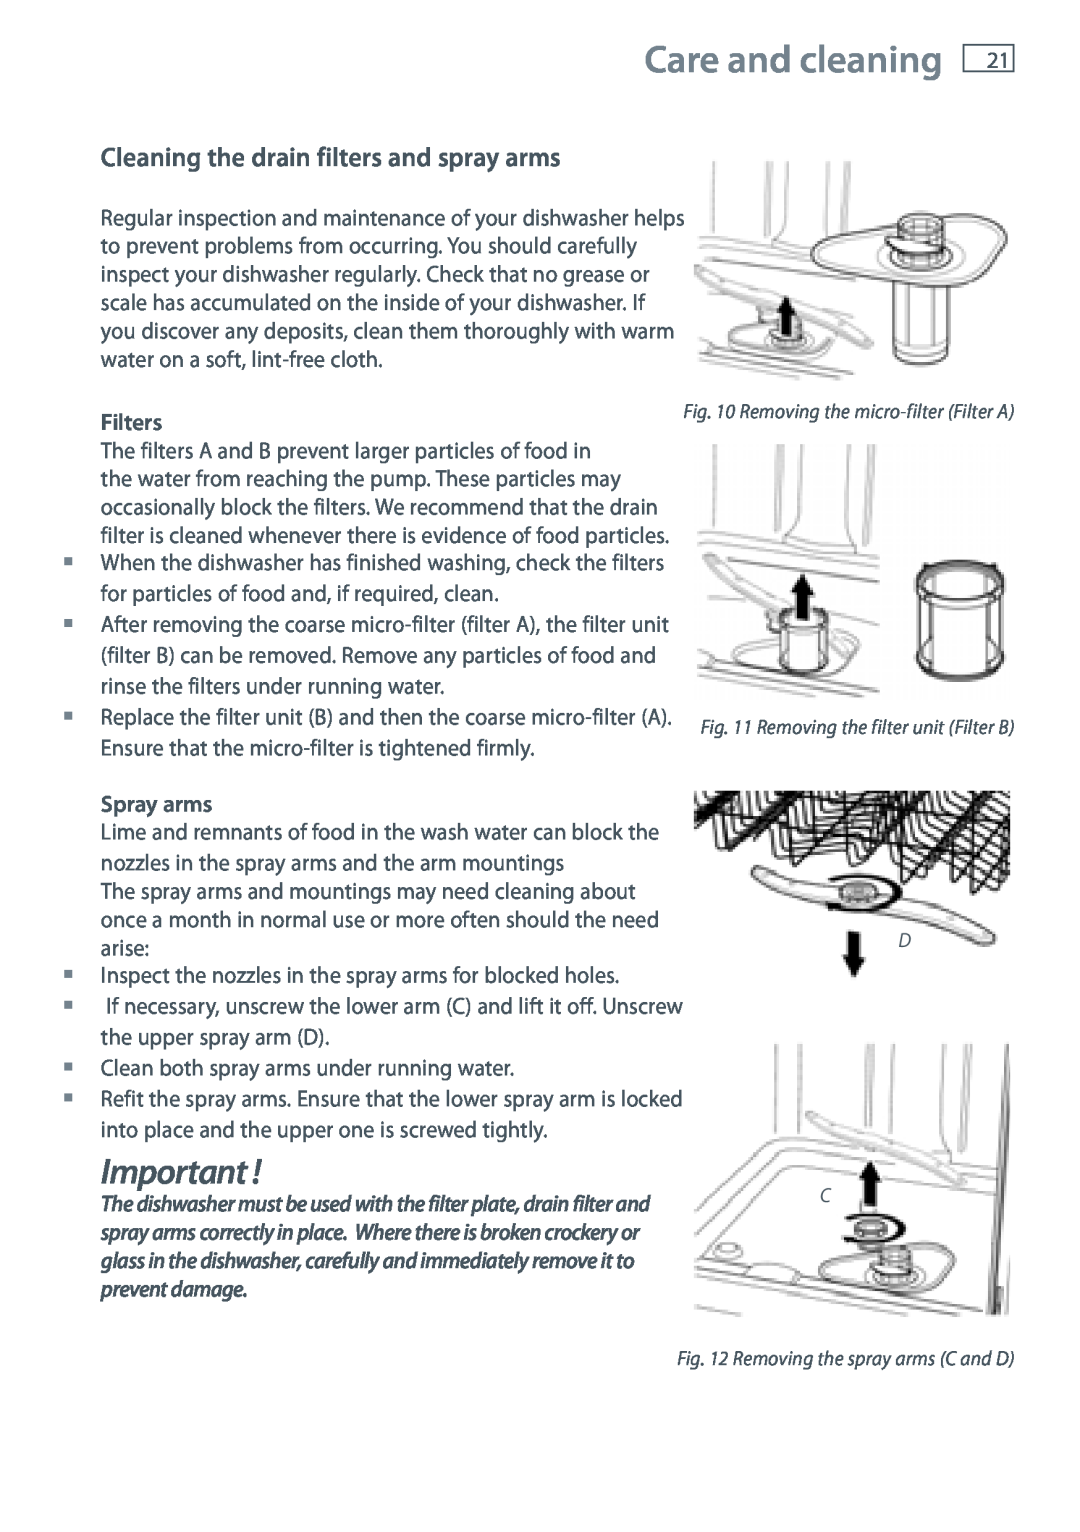 Fisher & Paykel DW60 installation instructions Care and cleaning, Cleaning the drain filters and spray arms, prevent damage 